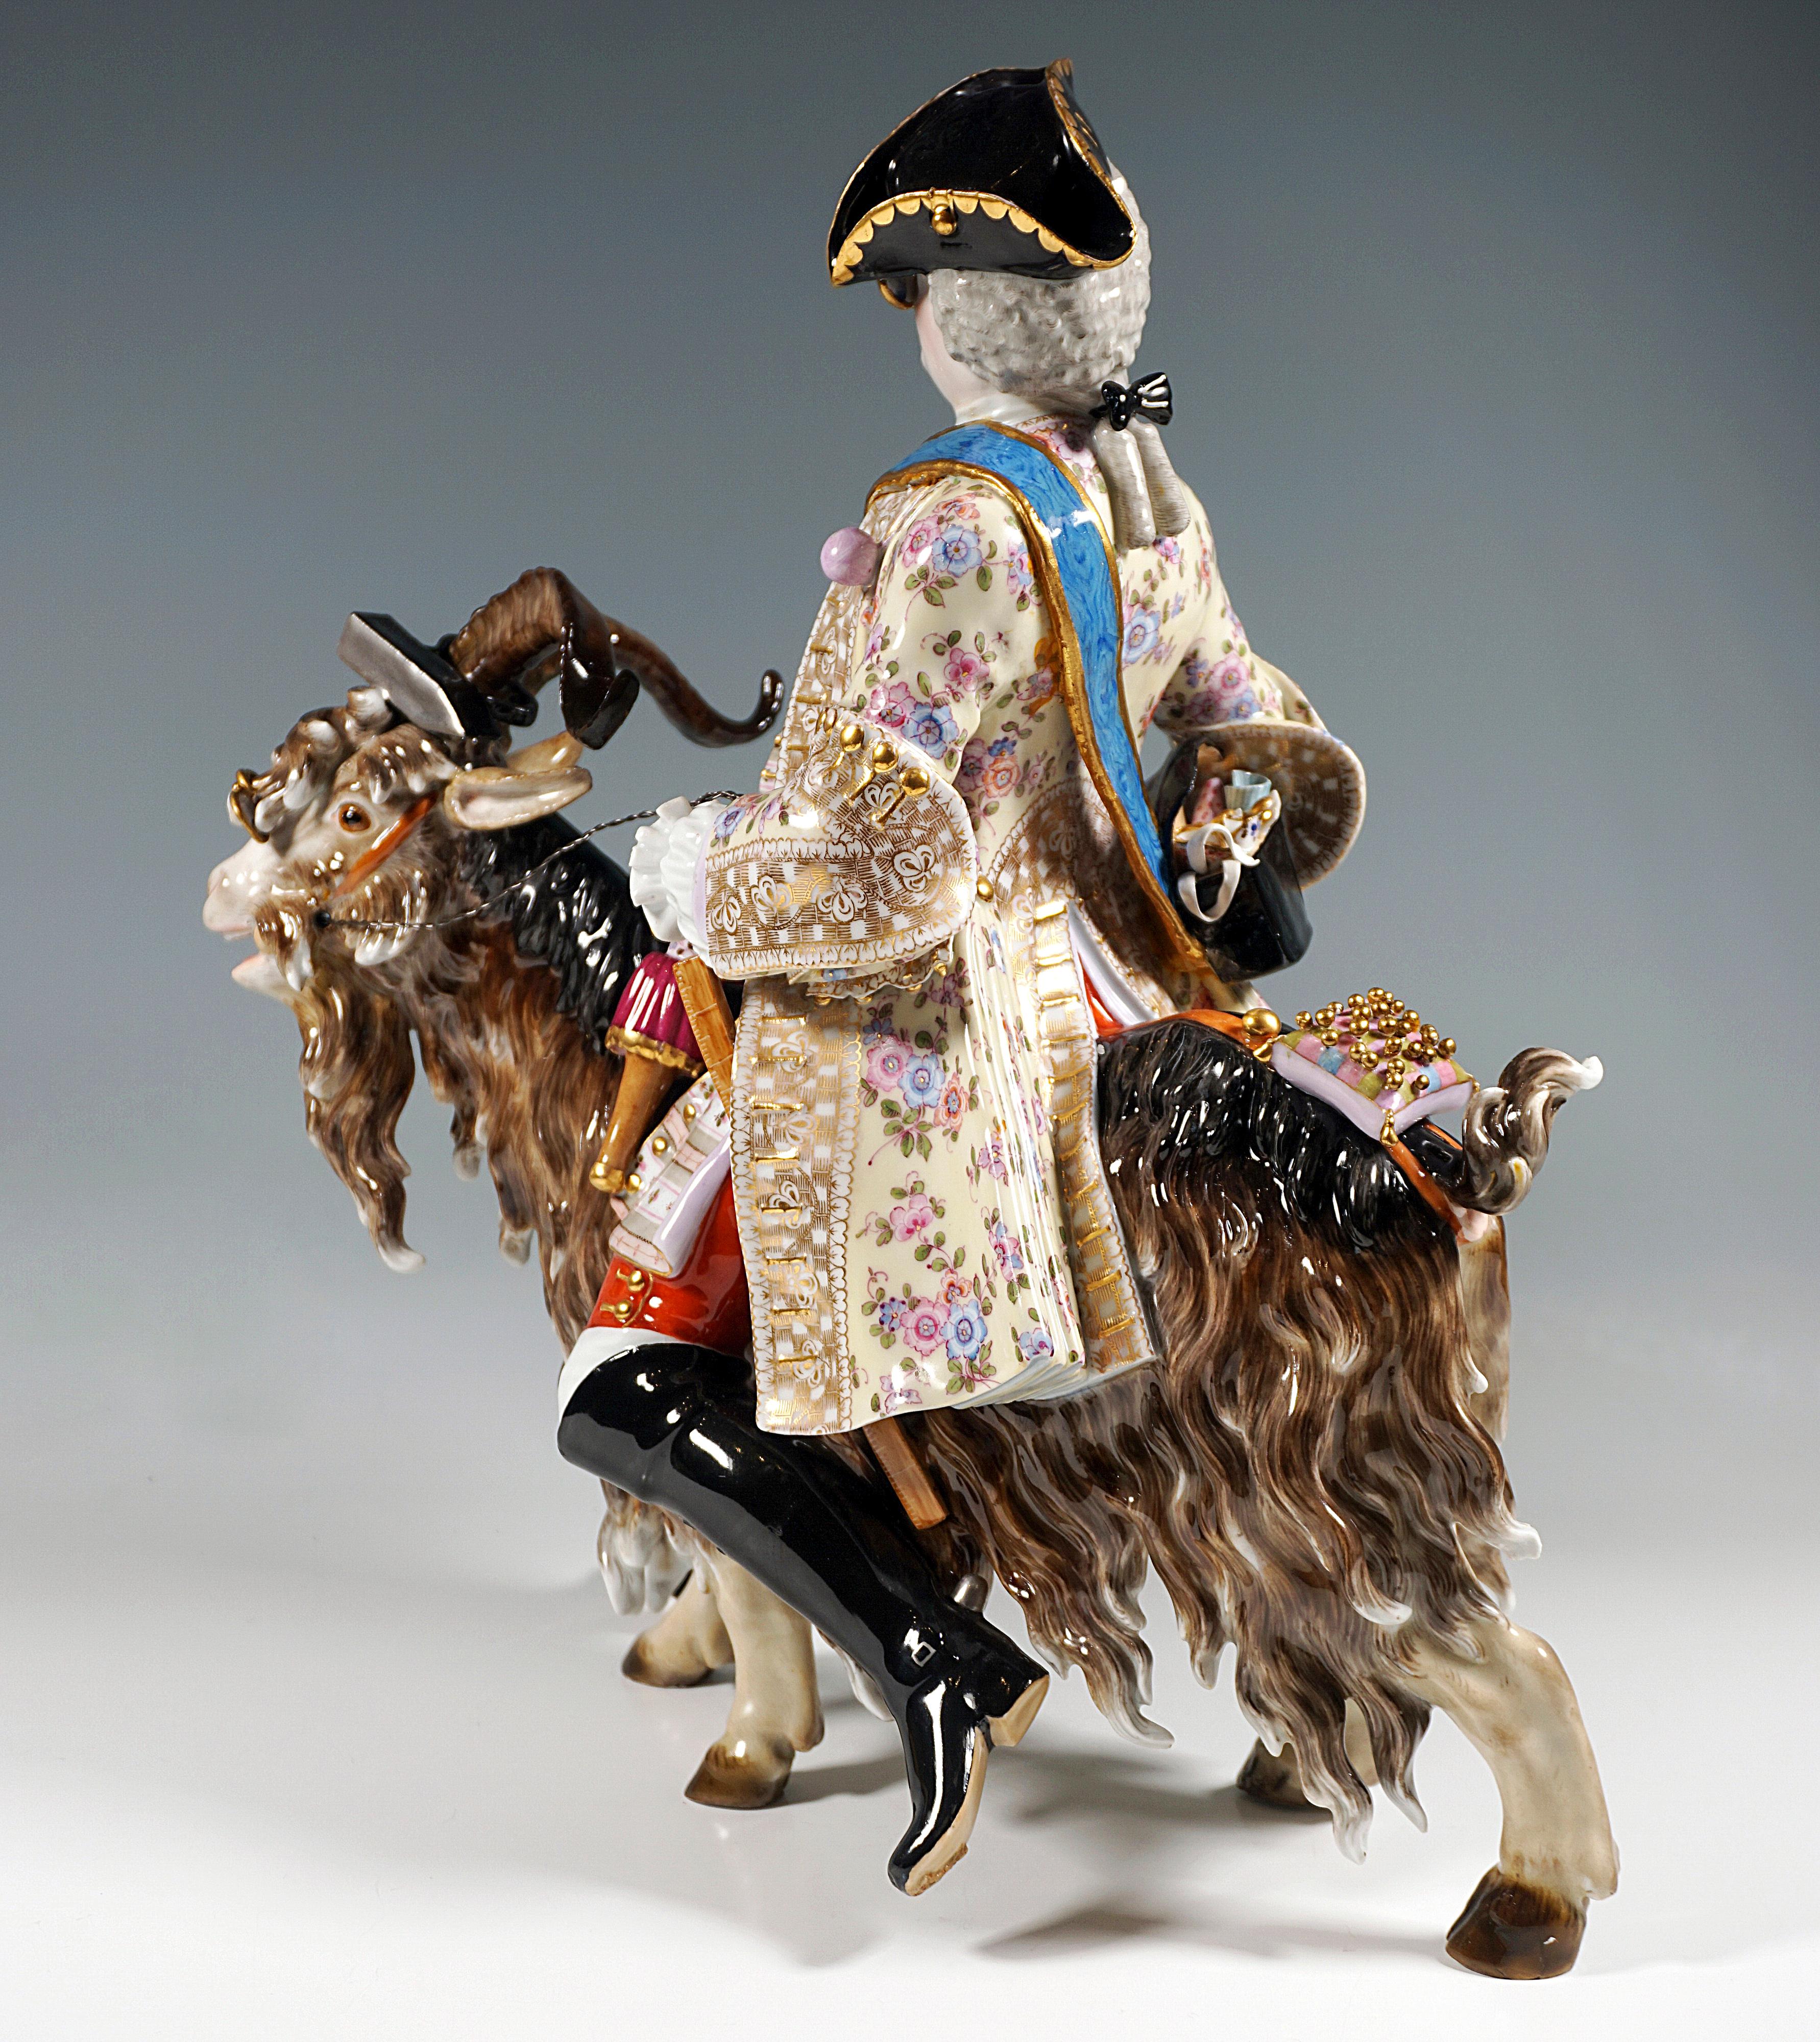 Mid-19th Century  Large Meissen Figurine Group 'Tailor On Billy Goat', by J.J. Kaendler, ca 1850